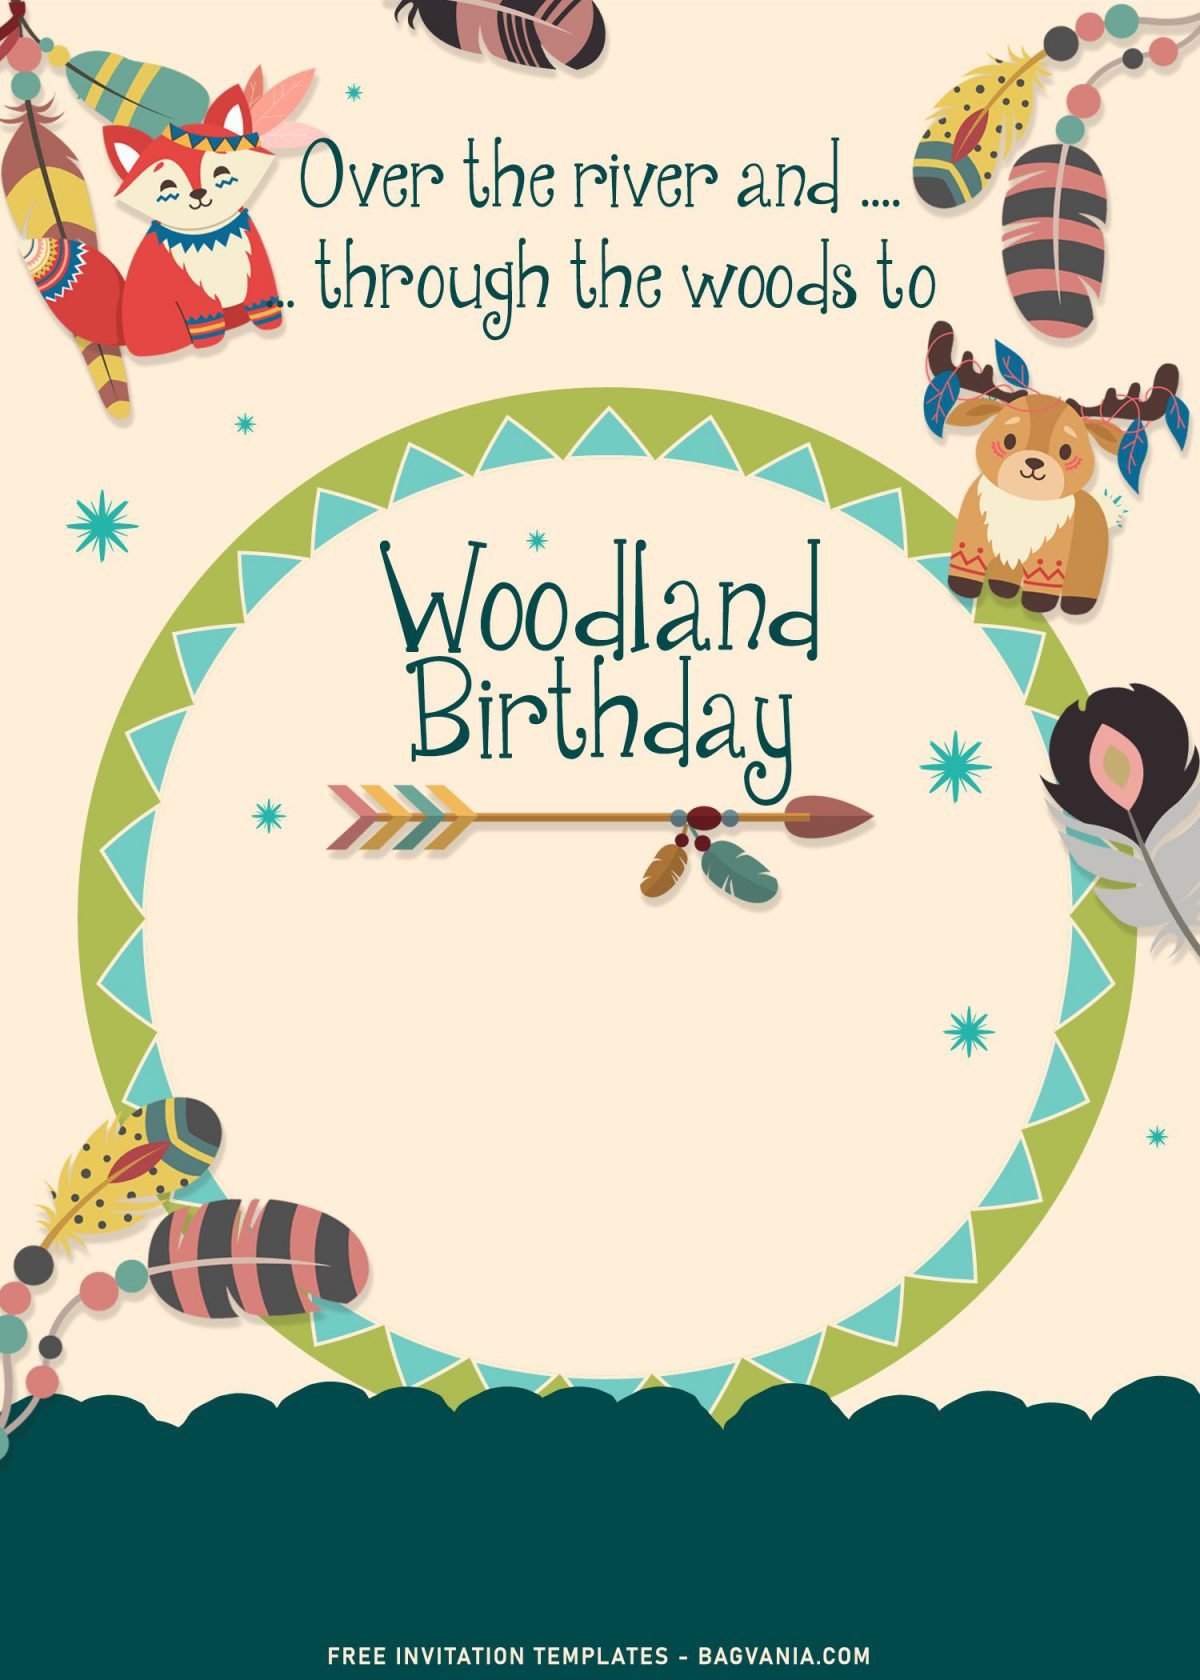 7+ Woodland Birthday Invitation Templates For Your Little Animal Lover Birthday and has baby deer